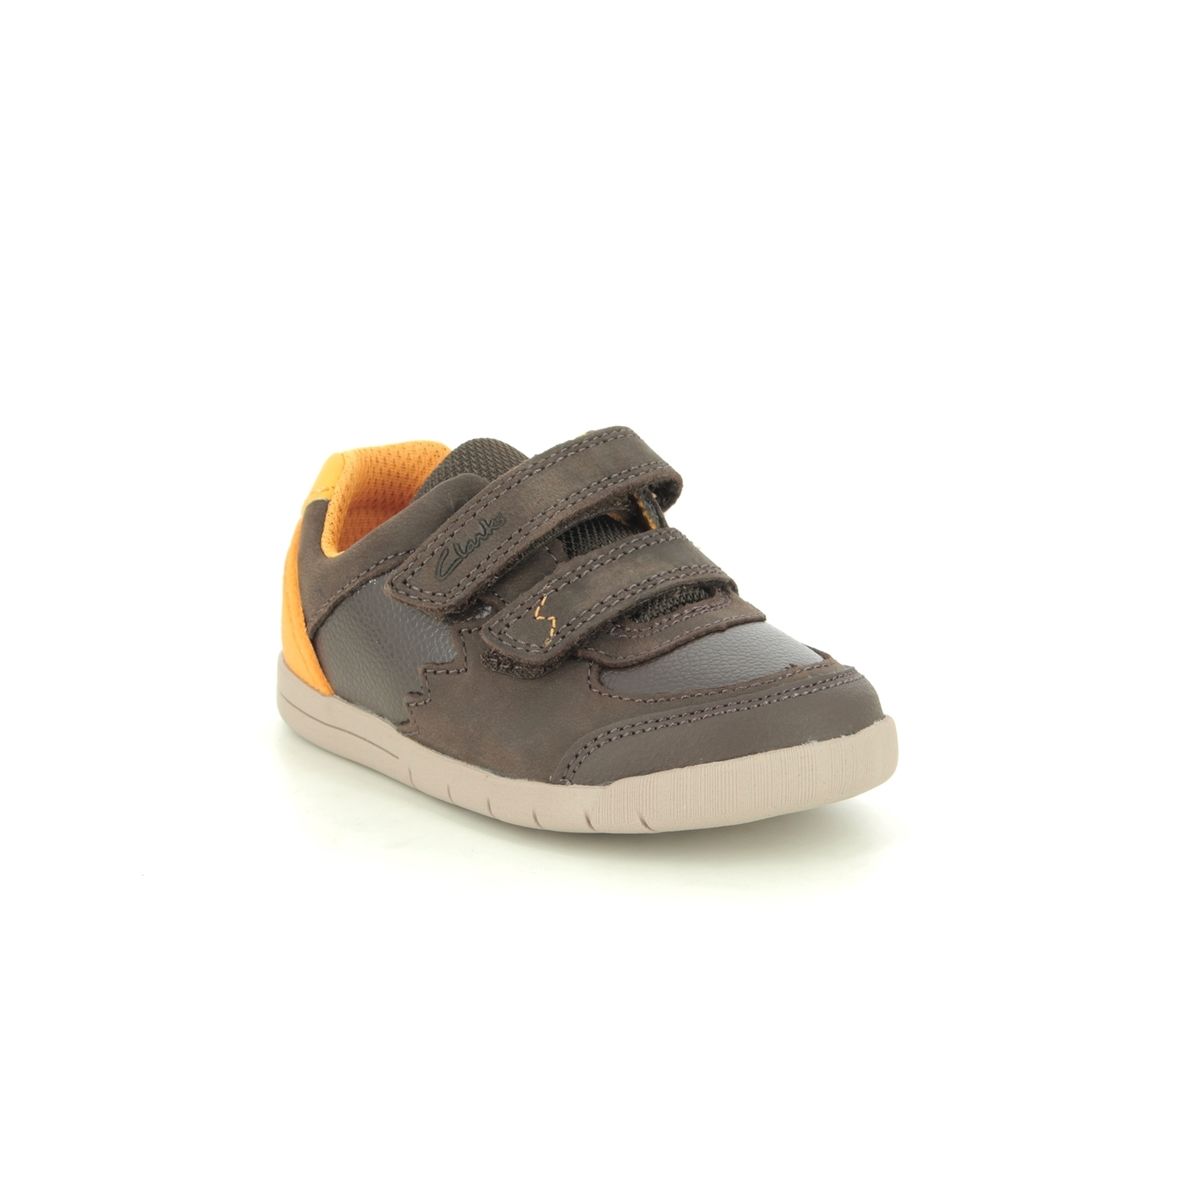 Clarks Rex Quest T Brown Leather Kids Boys Toddler Shoes 567757G In Size 8.5 In Plain Brown Leather G Width Fitting For kids